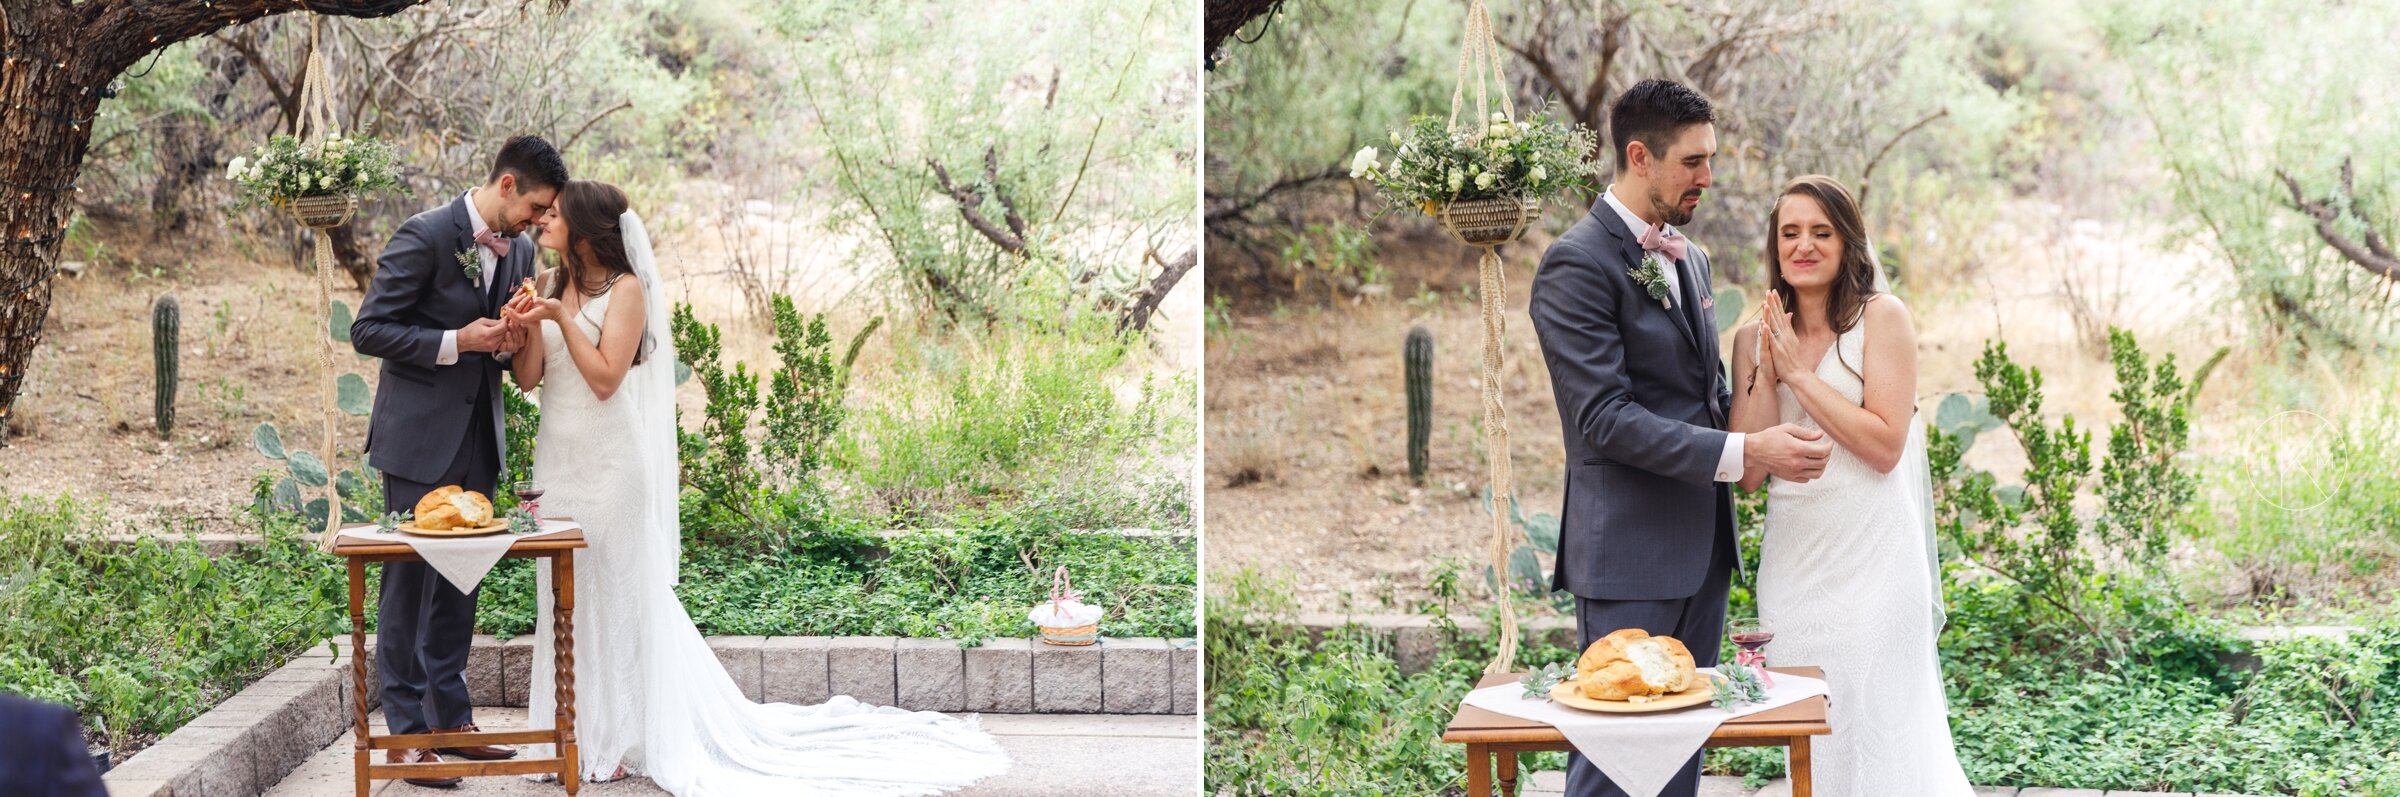 20_09_12_CLUTTER_LOWES_VENTANA_CANYON_WEDDING-PICTURES_laura-k-moore-photography 32.jpg